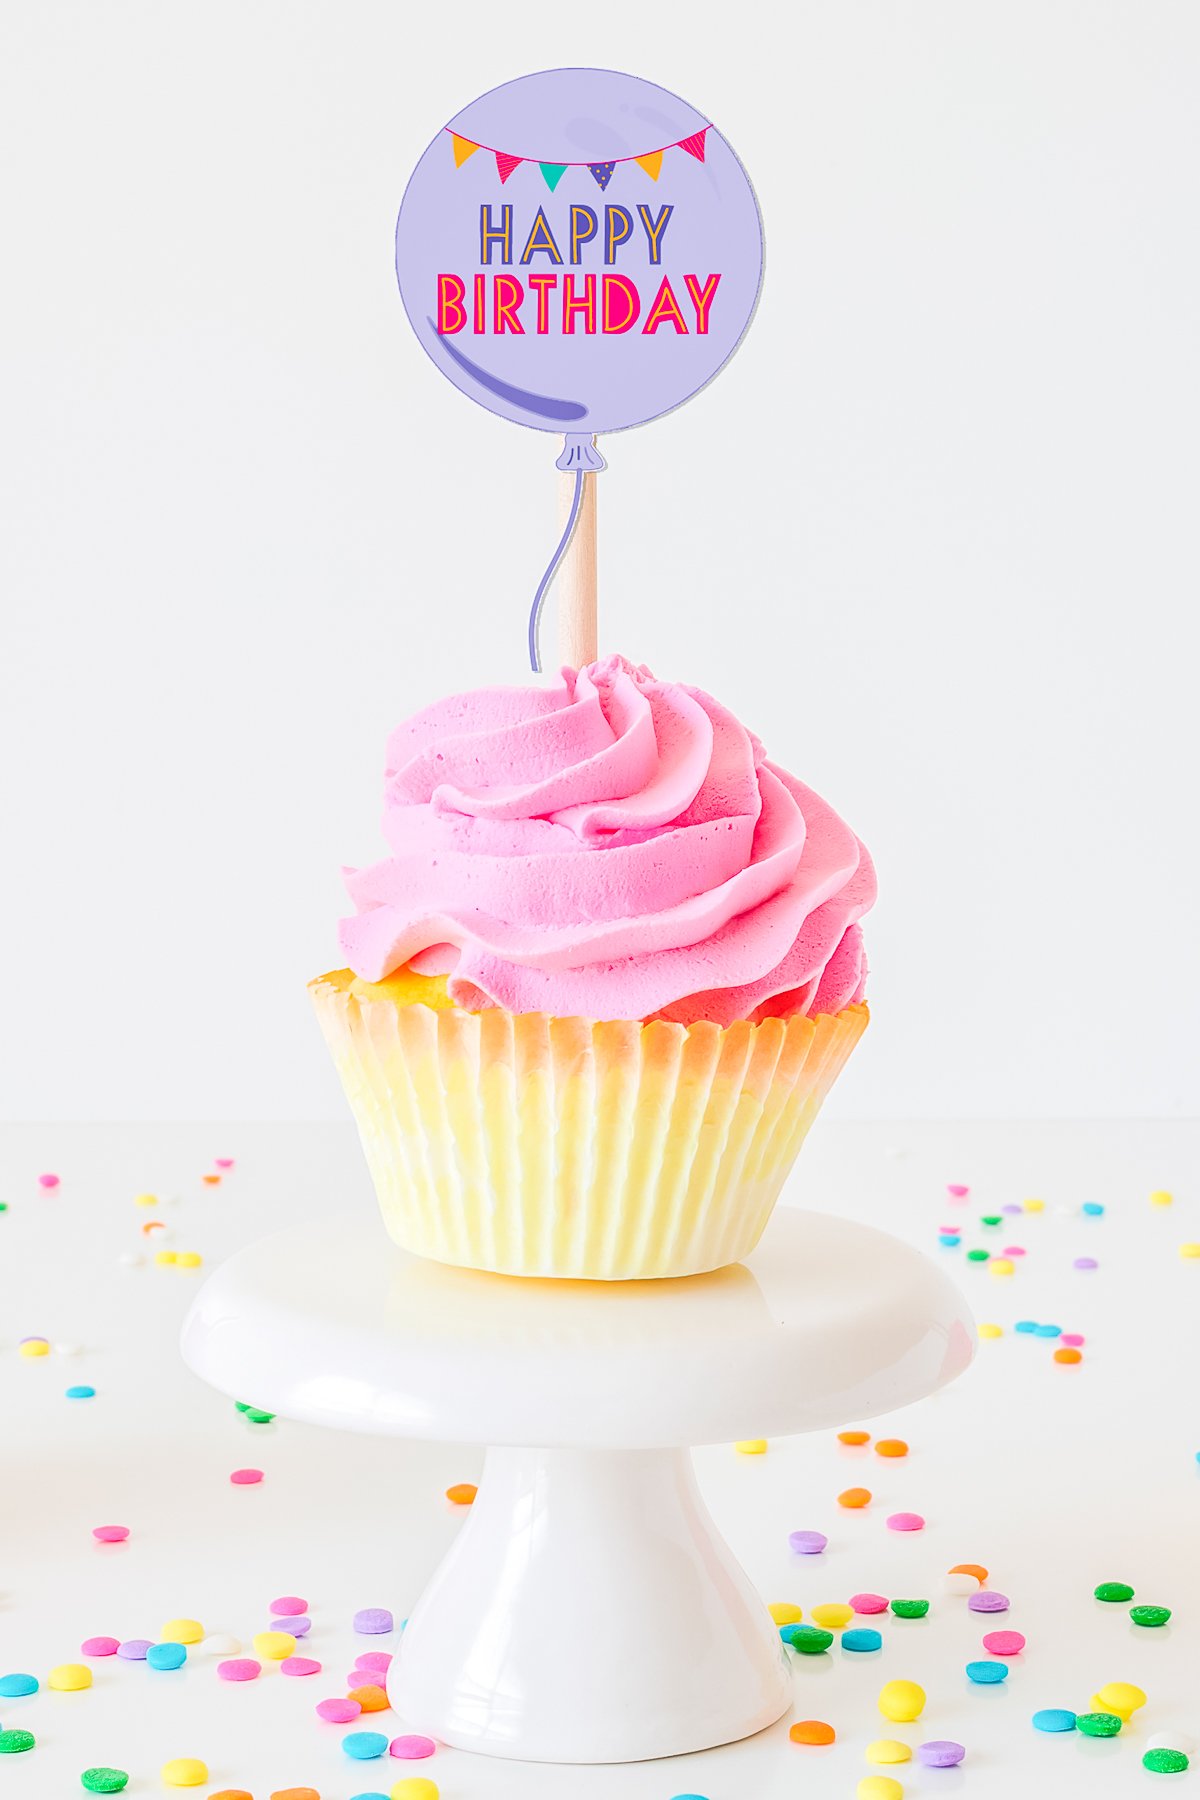 Free Printable Birthday Cupcake Toppers - Make Life Lovely